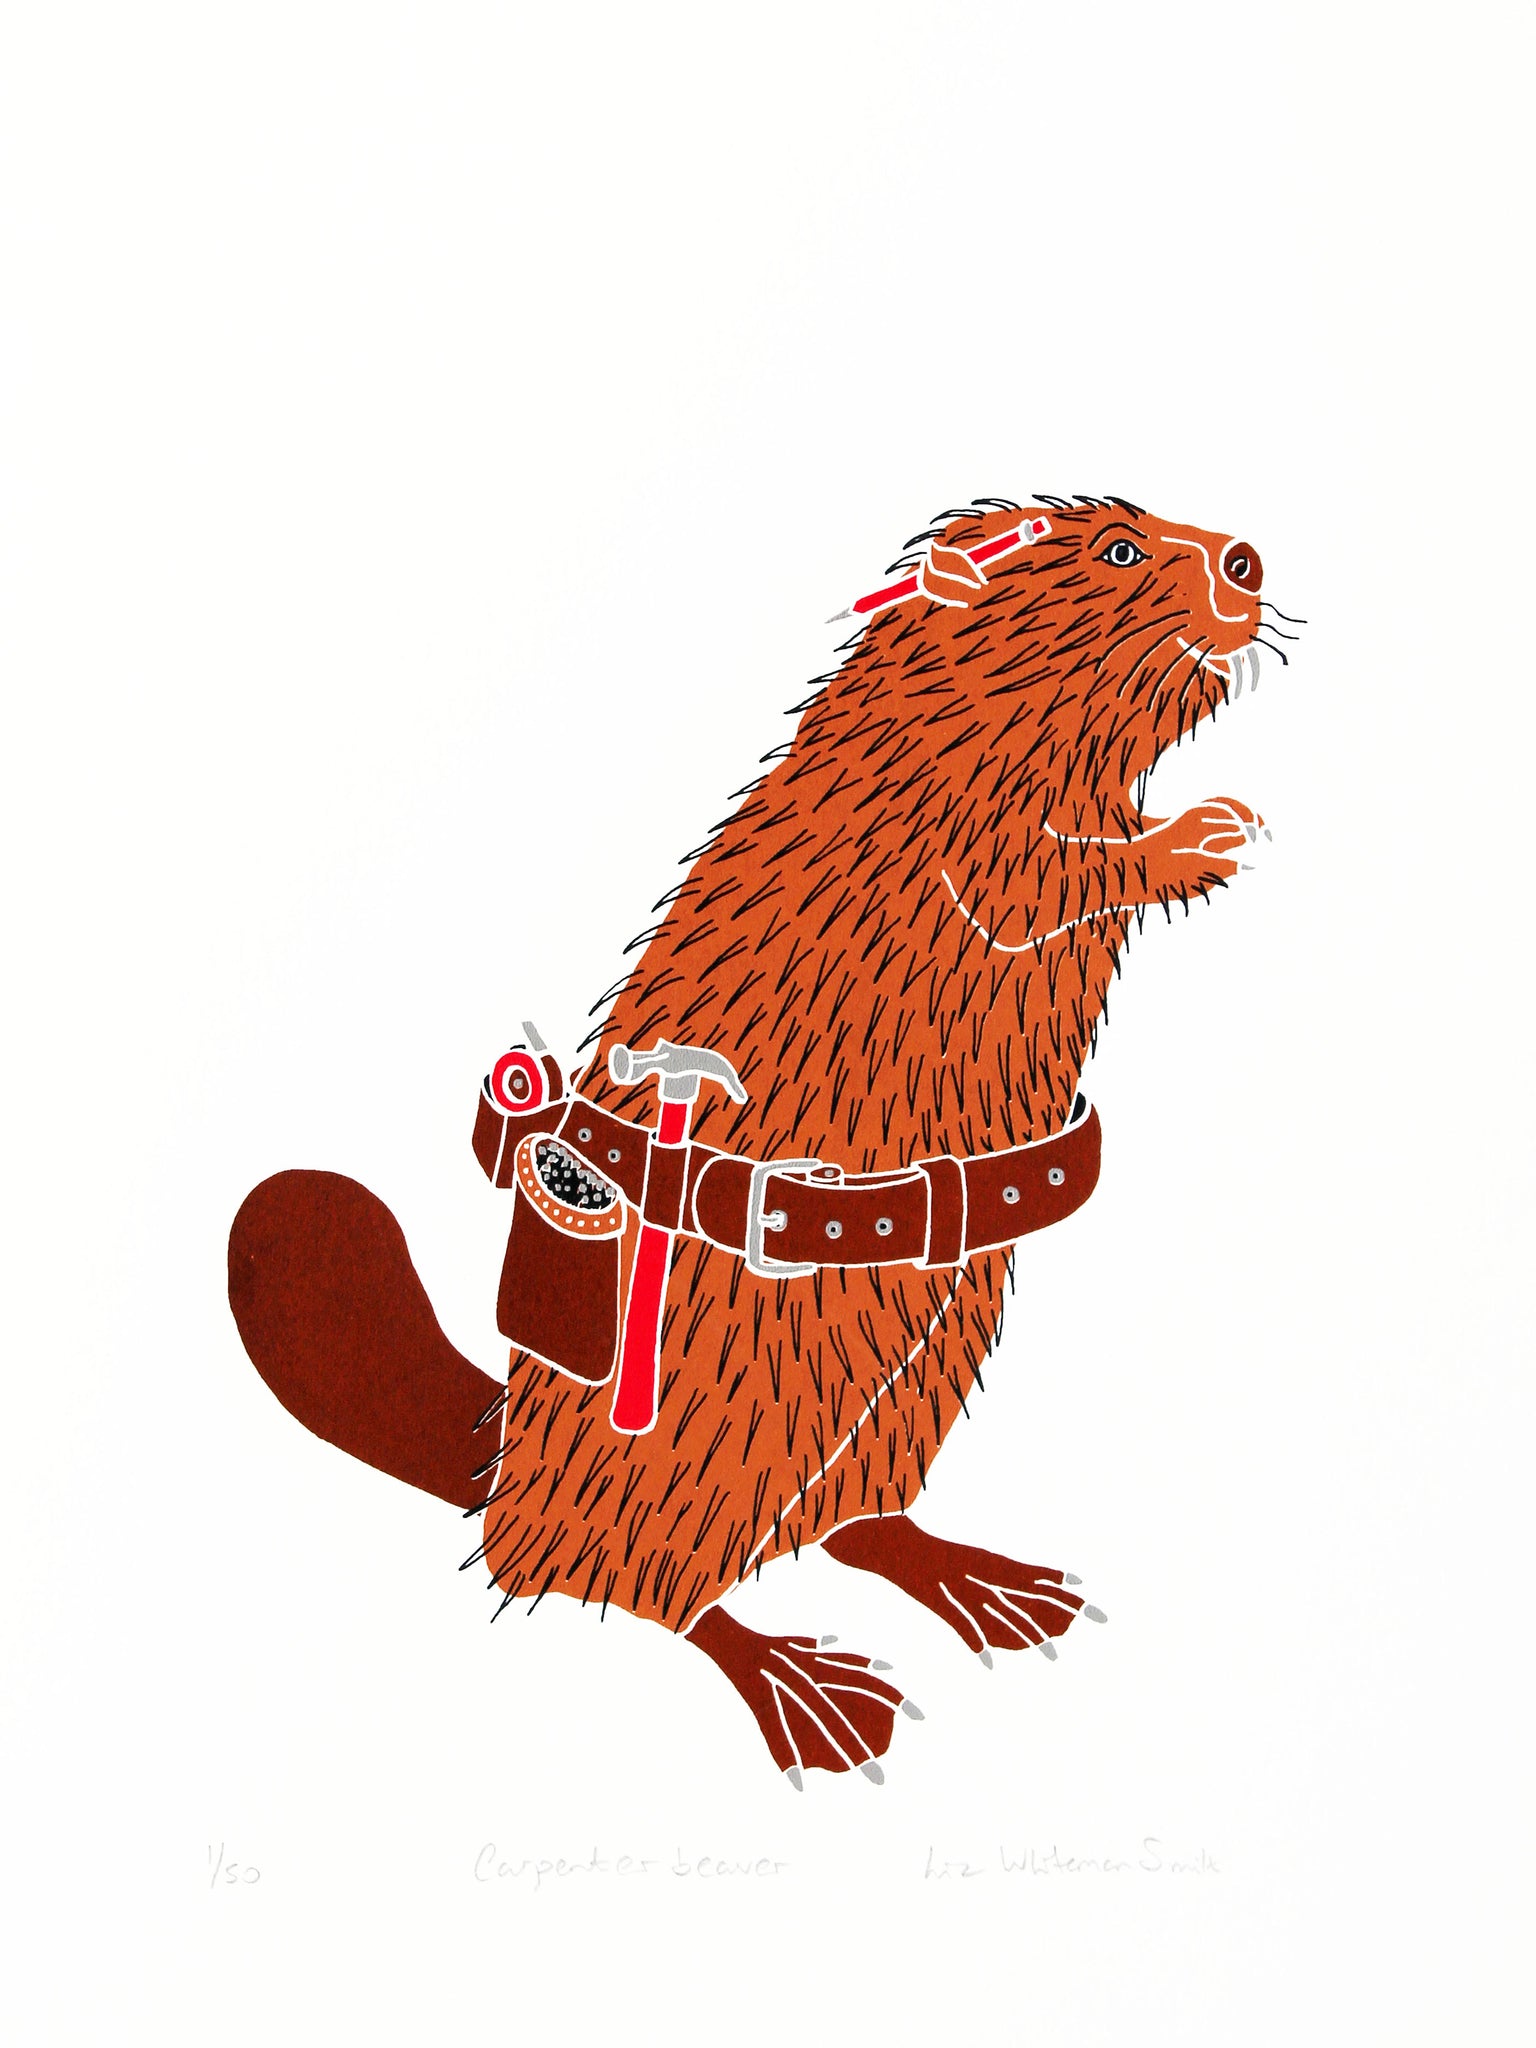 Animals have special characteristics that mean they are perfectly adapted to certain jobs. The beaver loves chewing wood and making things with wood. 4 colour screen print, 30x40 cm, £80.